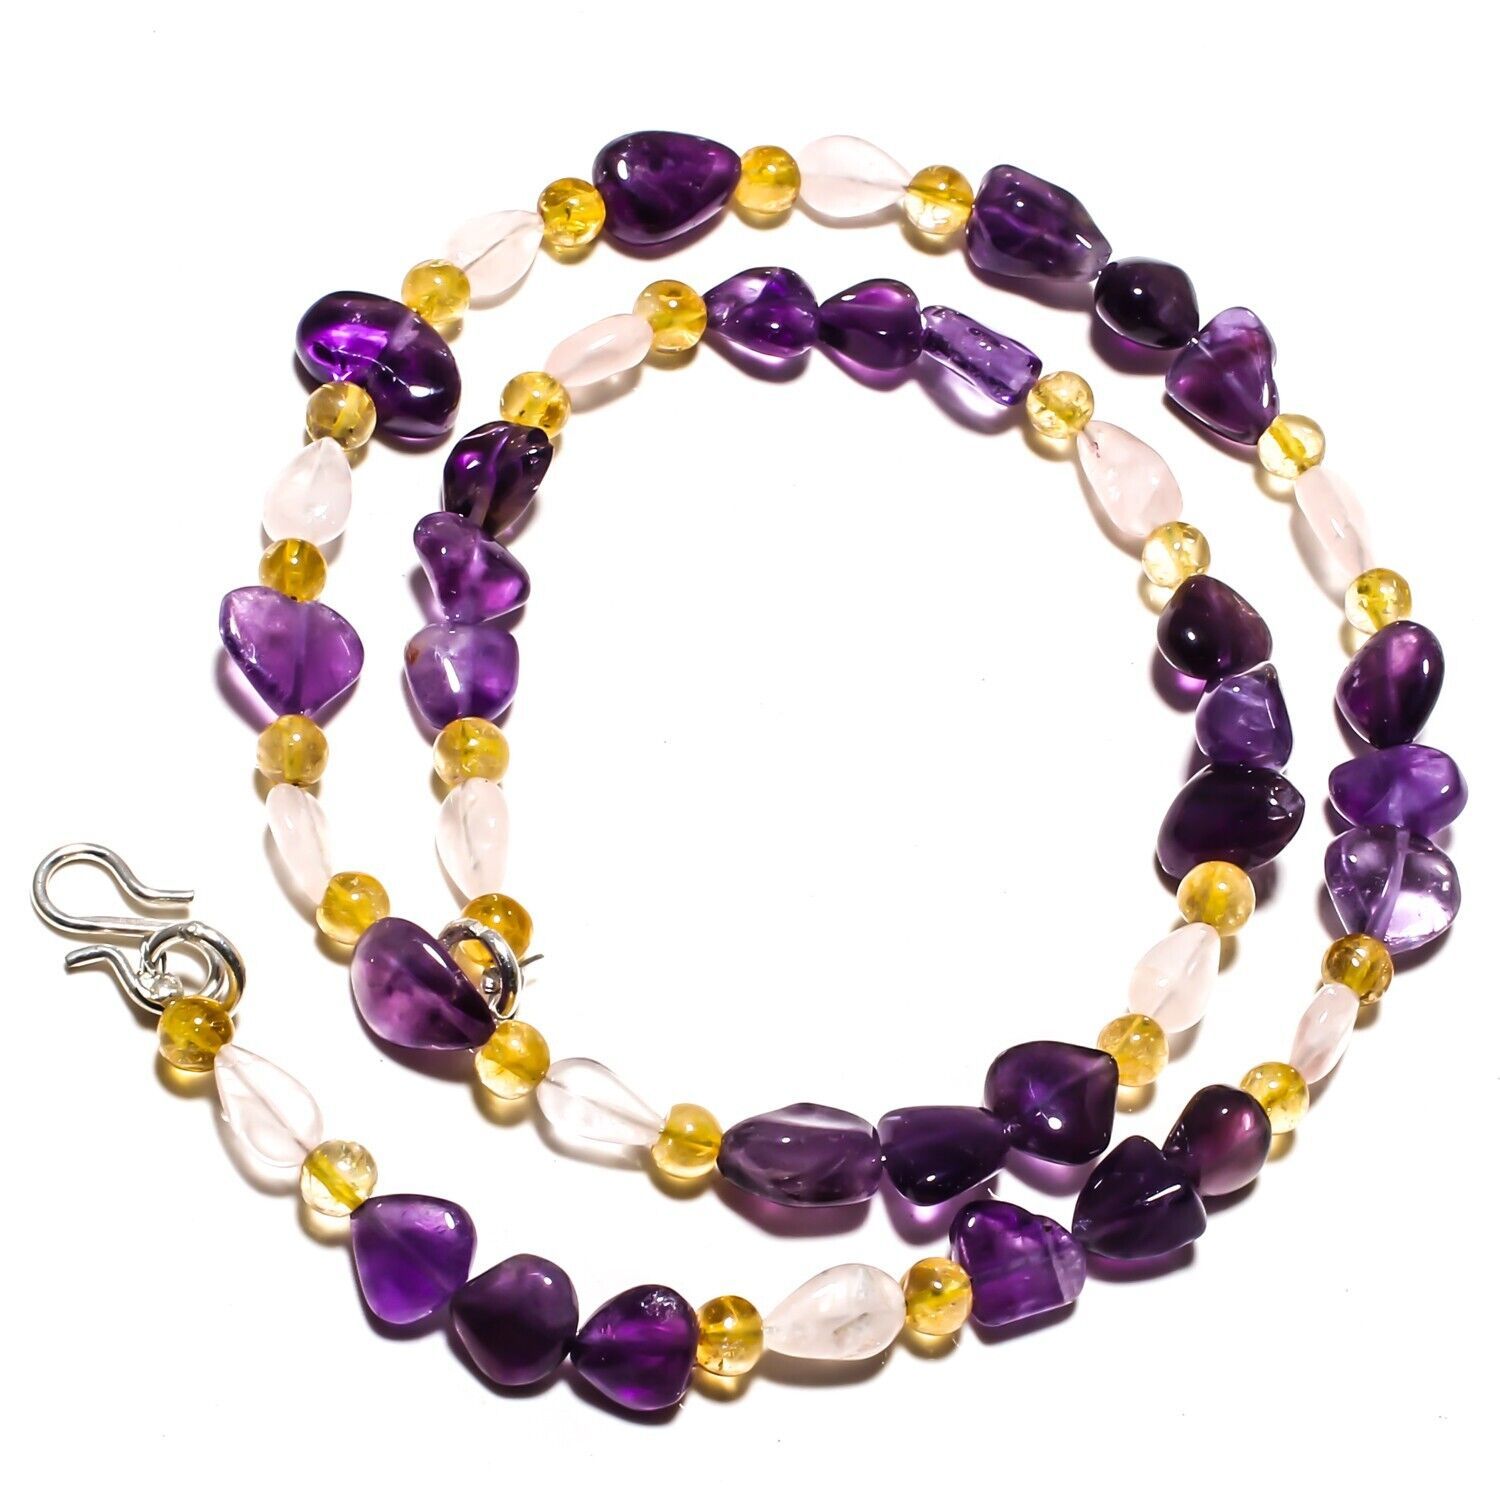 Primary image for Amethyst Sage Natural Gemstone Beads Jewelry Necklace 17" 96 Ct. KB-389